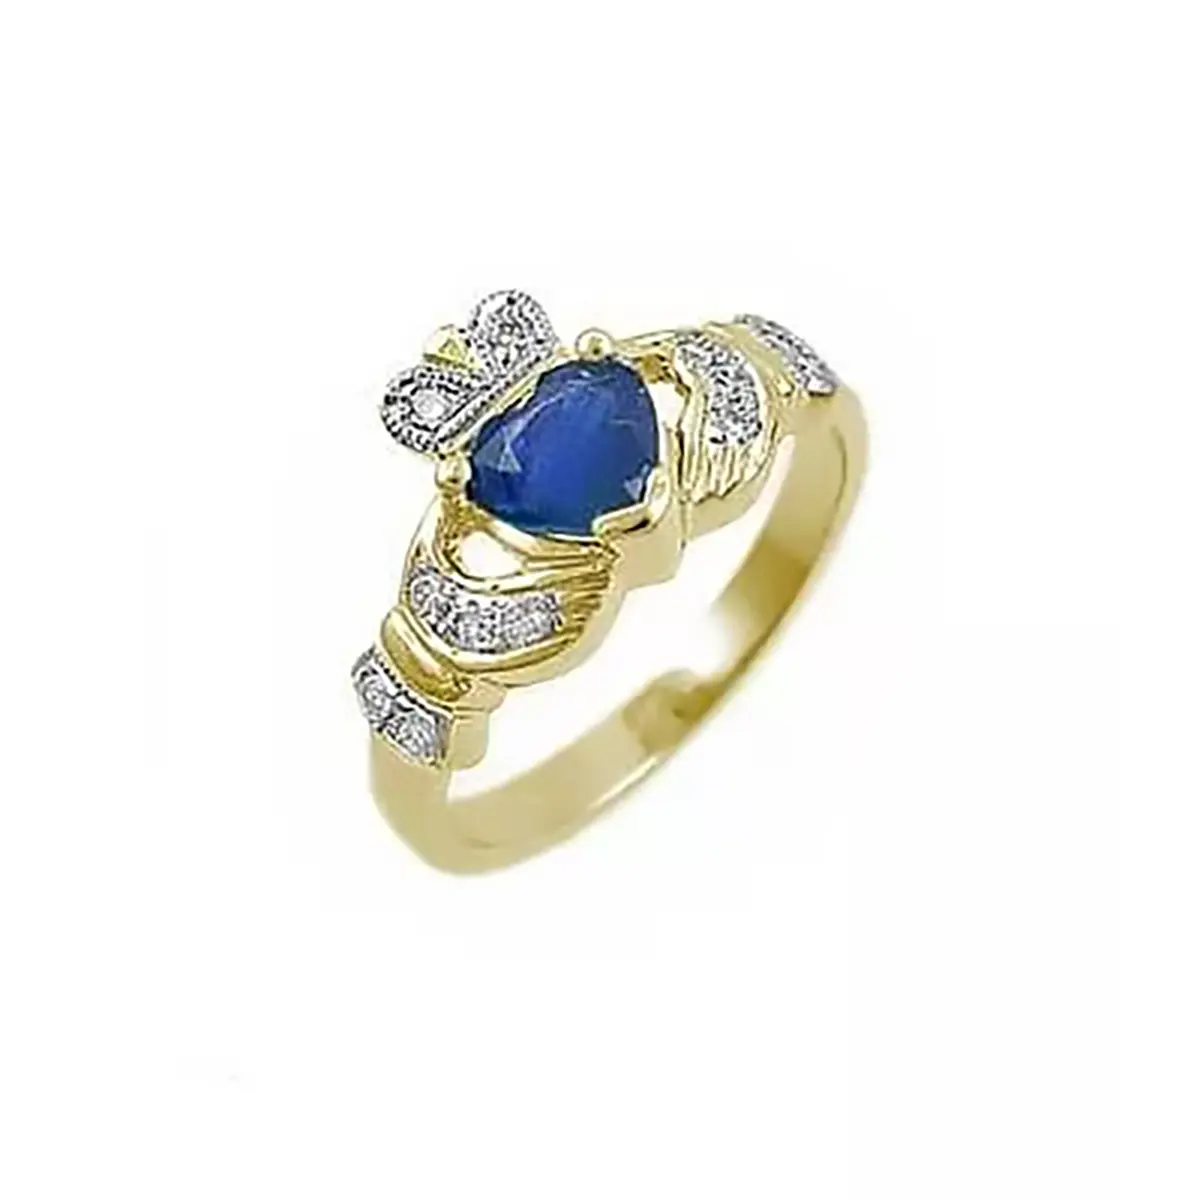 Claddagh Ring With Heartshape Sapphire And Diamonds...